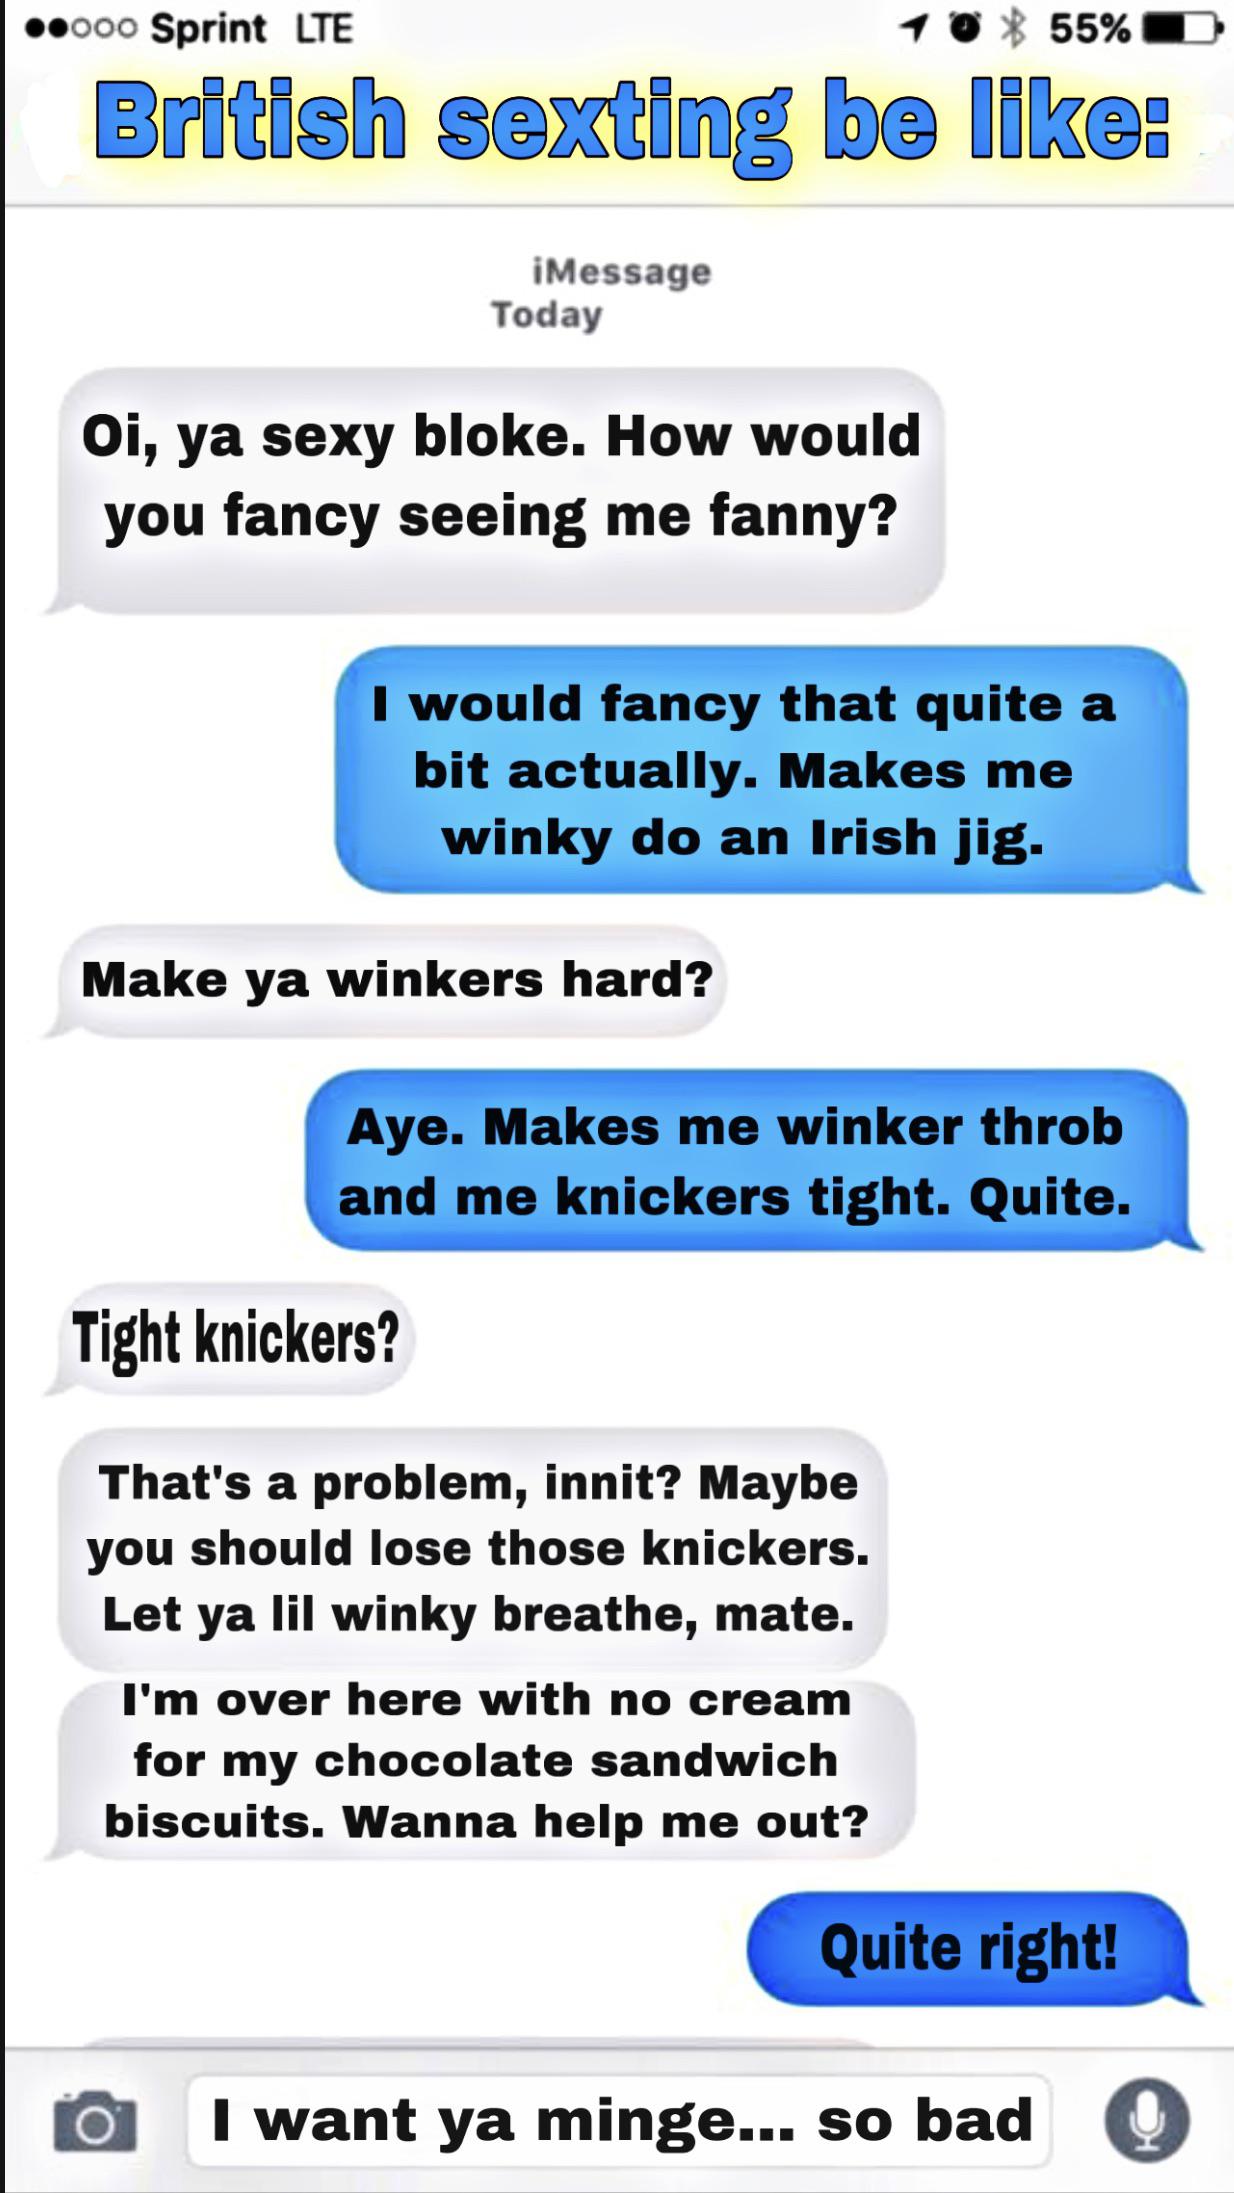 dank memes - web page - 000 Sprint Lte 55% British sexting be iMessage Today Oi, ya sexy bloke. How would you fancy seeing me fanny? I would fancy that quite a bit actually. Makes me winky do an Irish jig. Make ya winkers hard? Aye. Makes me winker throb